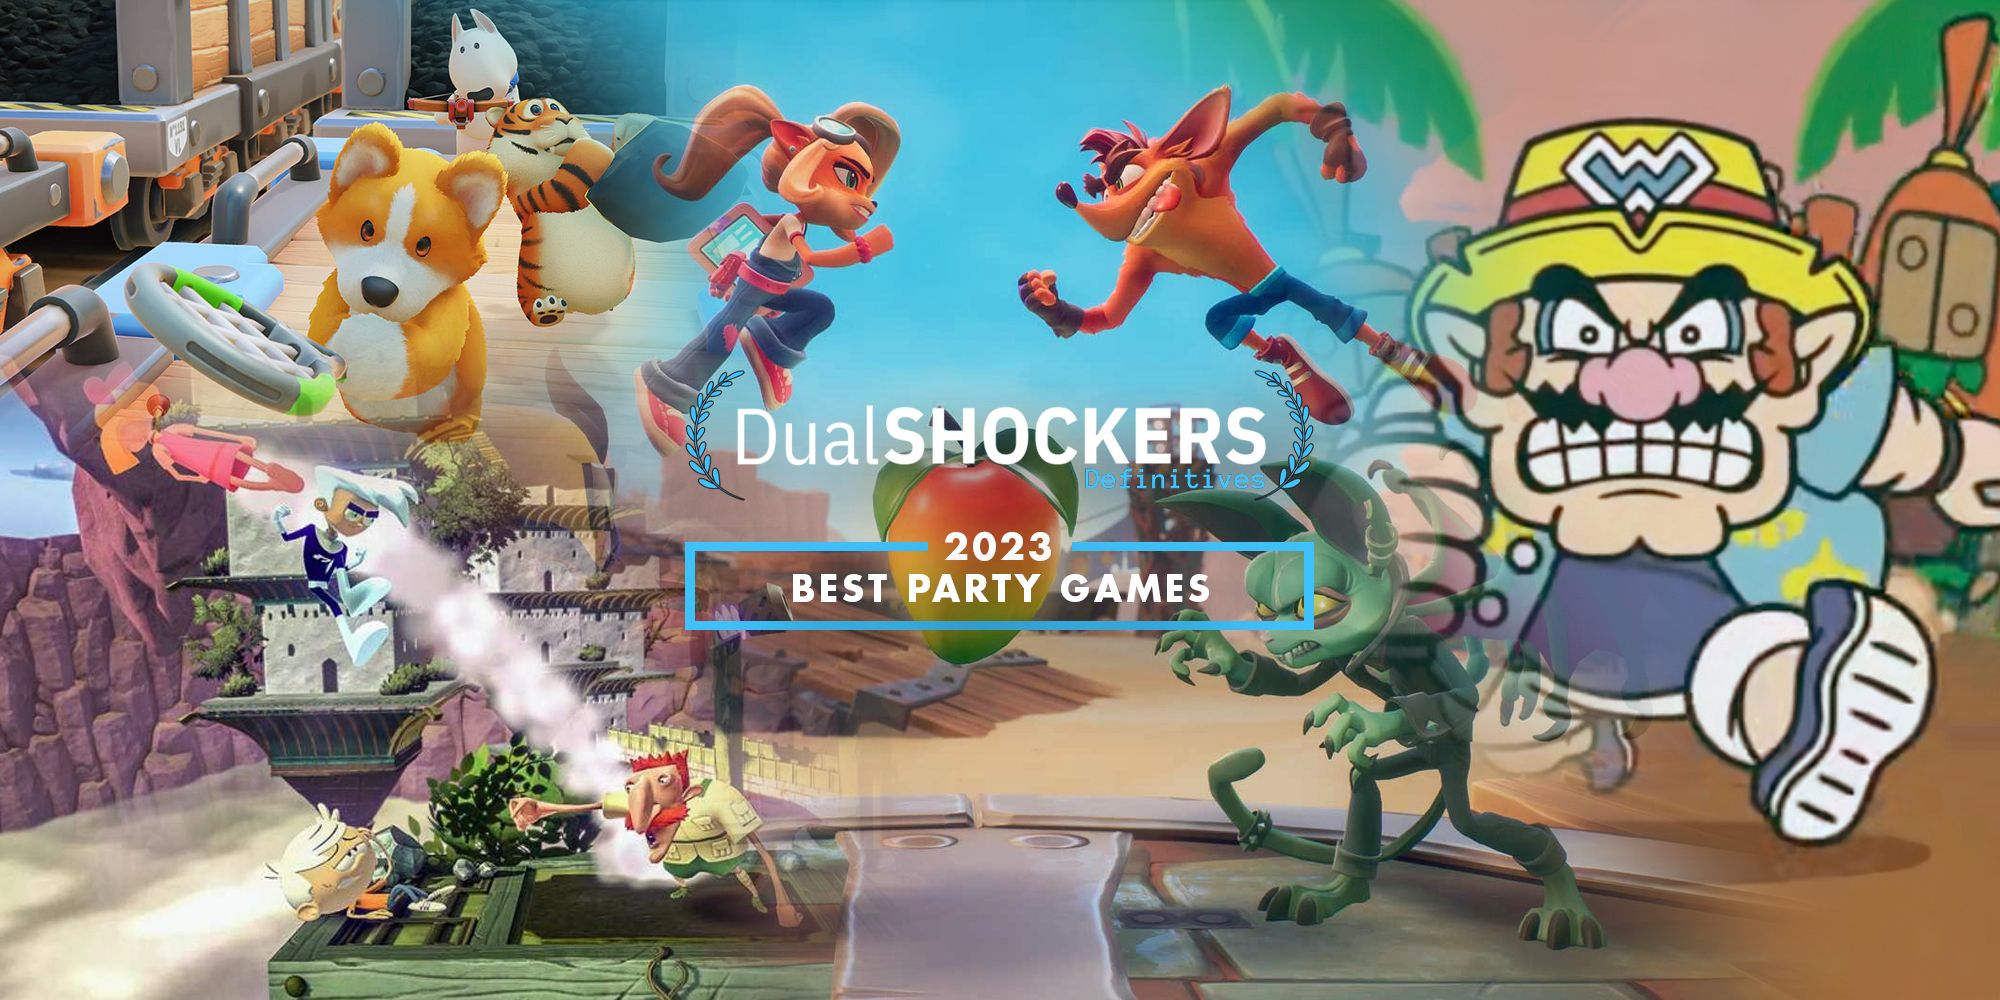 DualShockers Definitives best party games of 2023 art